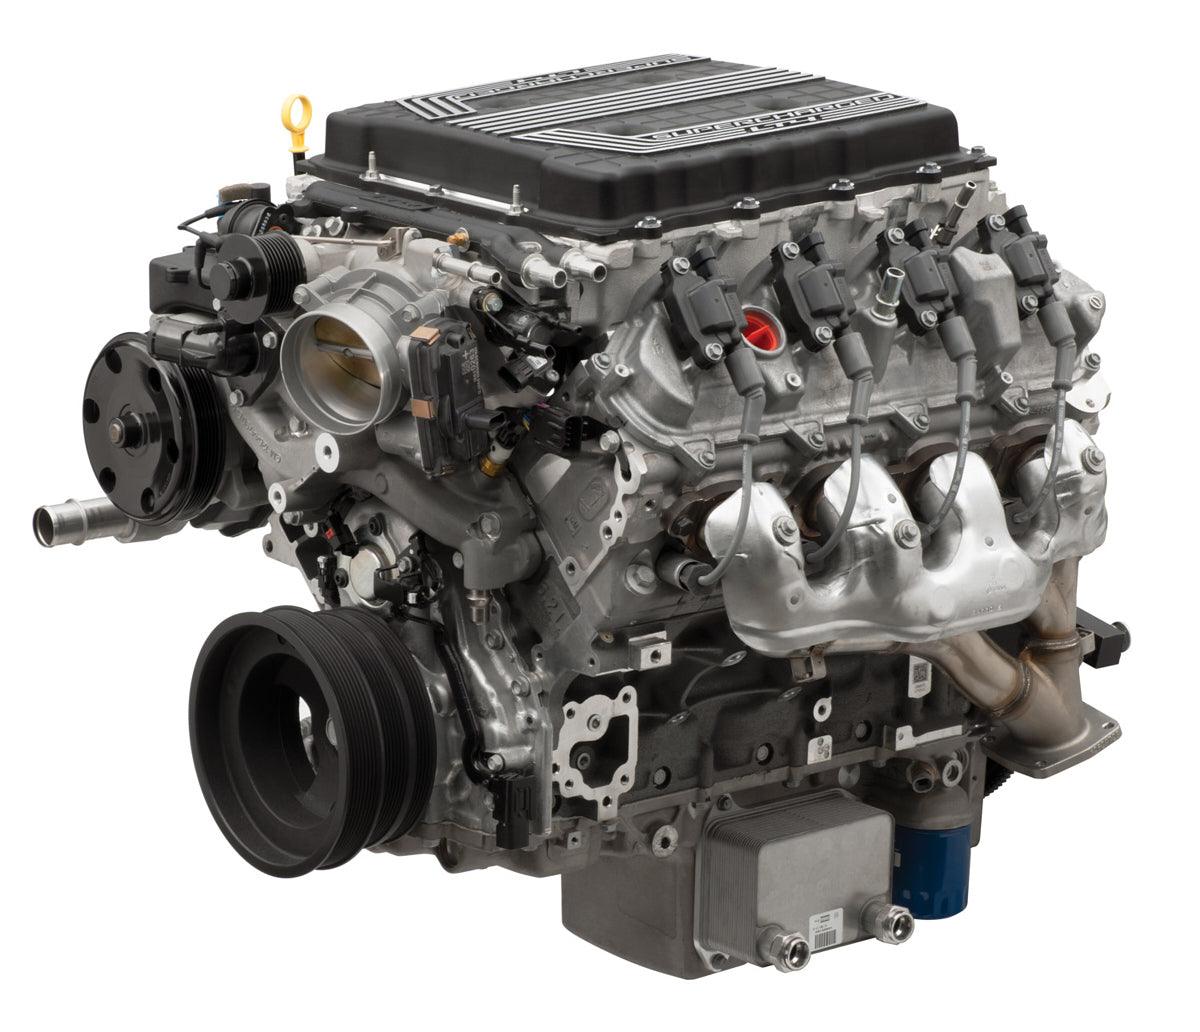 Crate Engine - 6.2L LT4 Supercharged - Burlile Performance Products